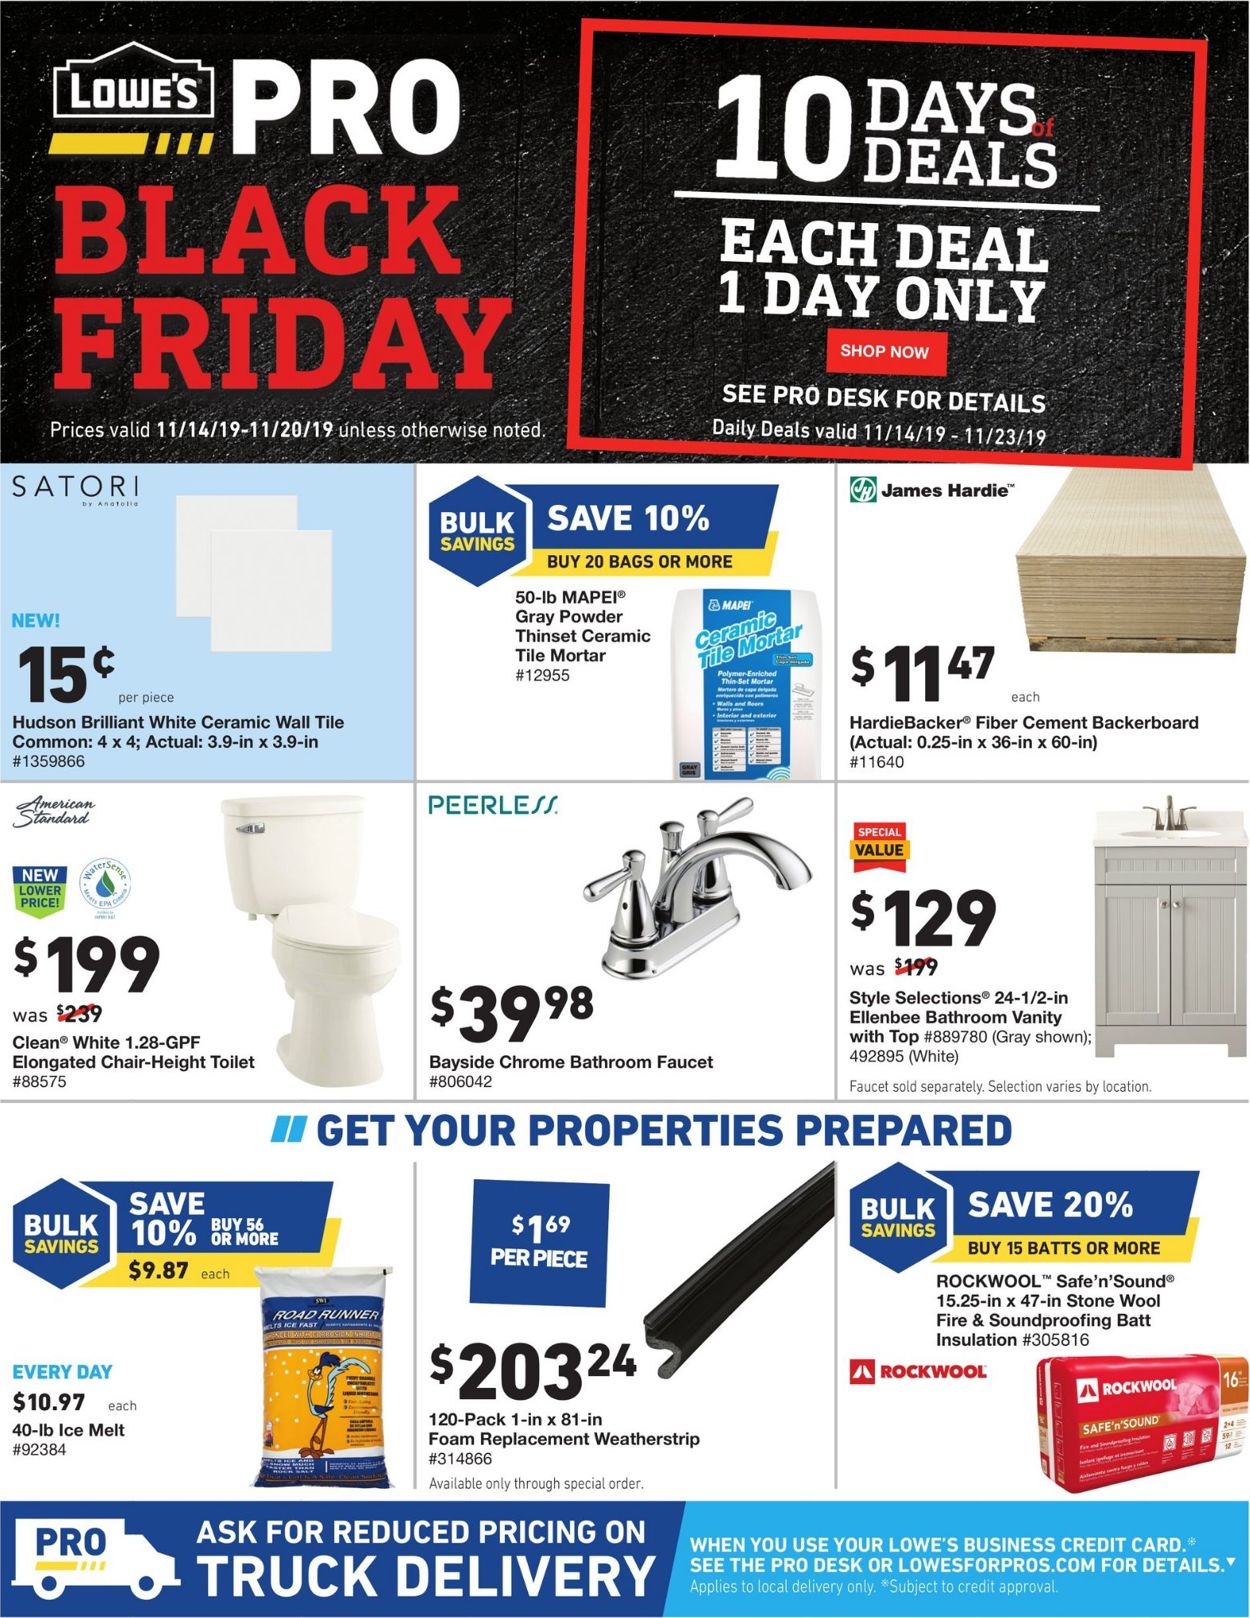 lowes-black-friday-deals-2019-catalog-stanford-center-for-opportunity